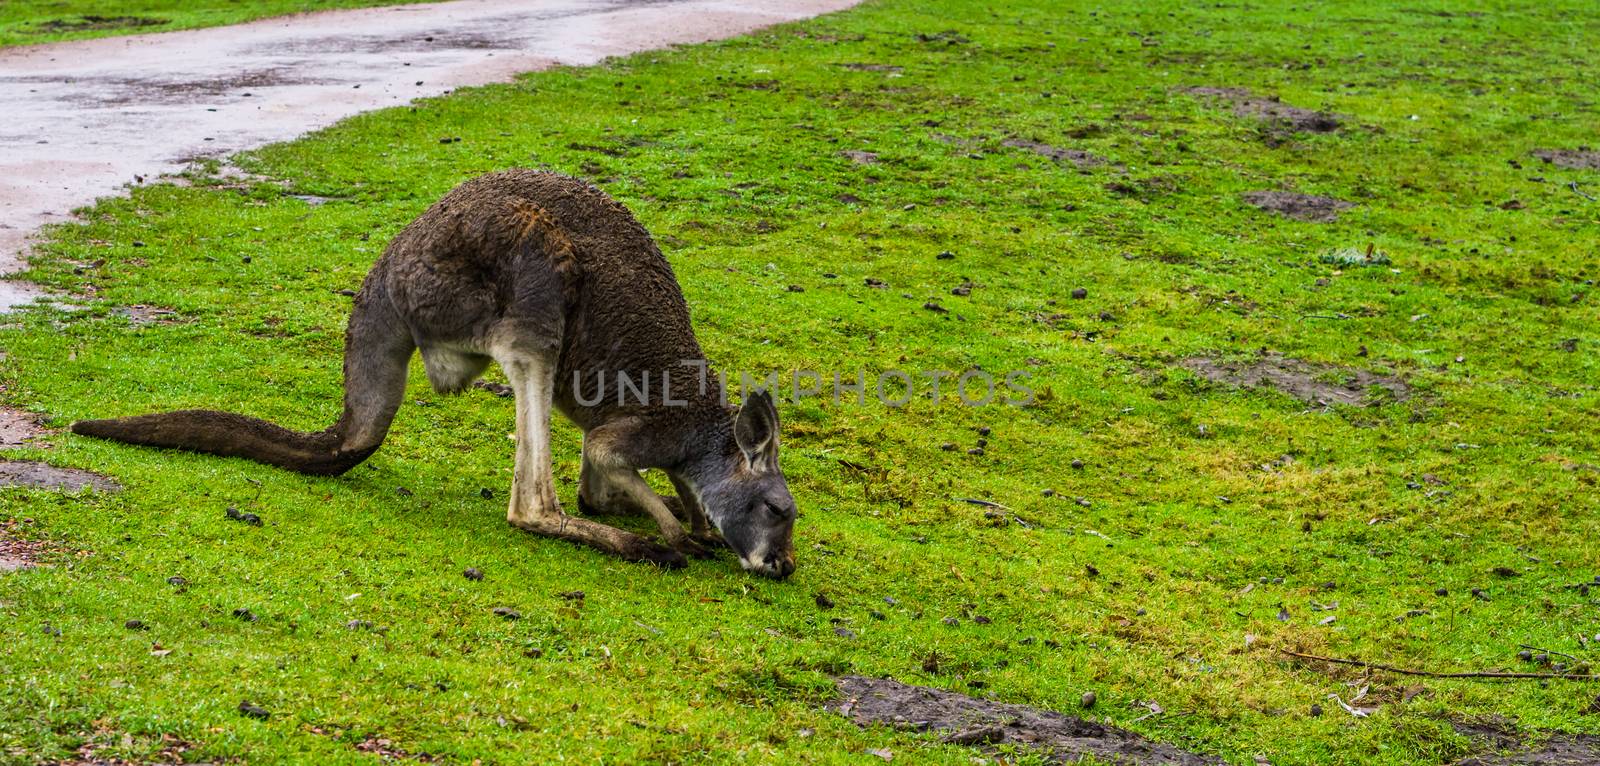 red necked wallaby grazing in the grass, Kangaroo from australia by charlottebleijenberg